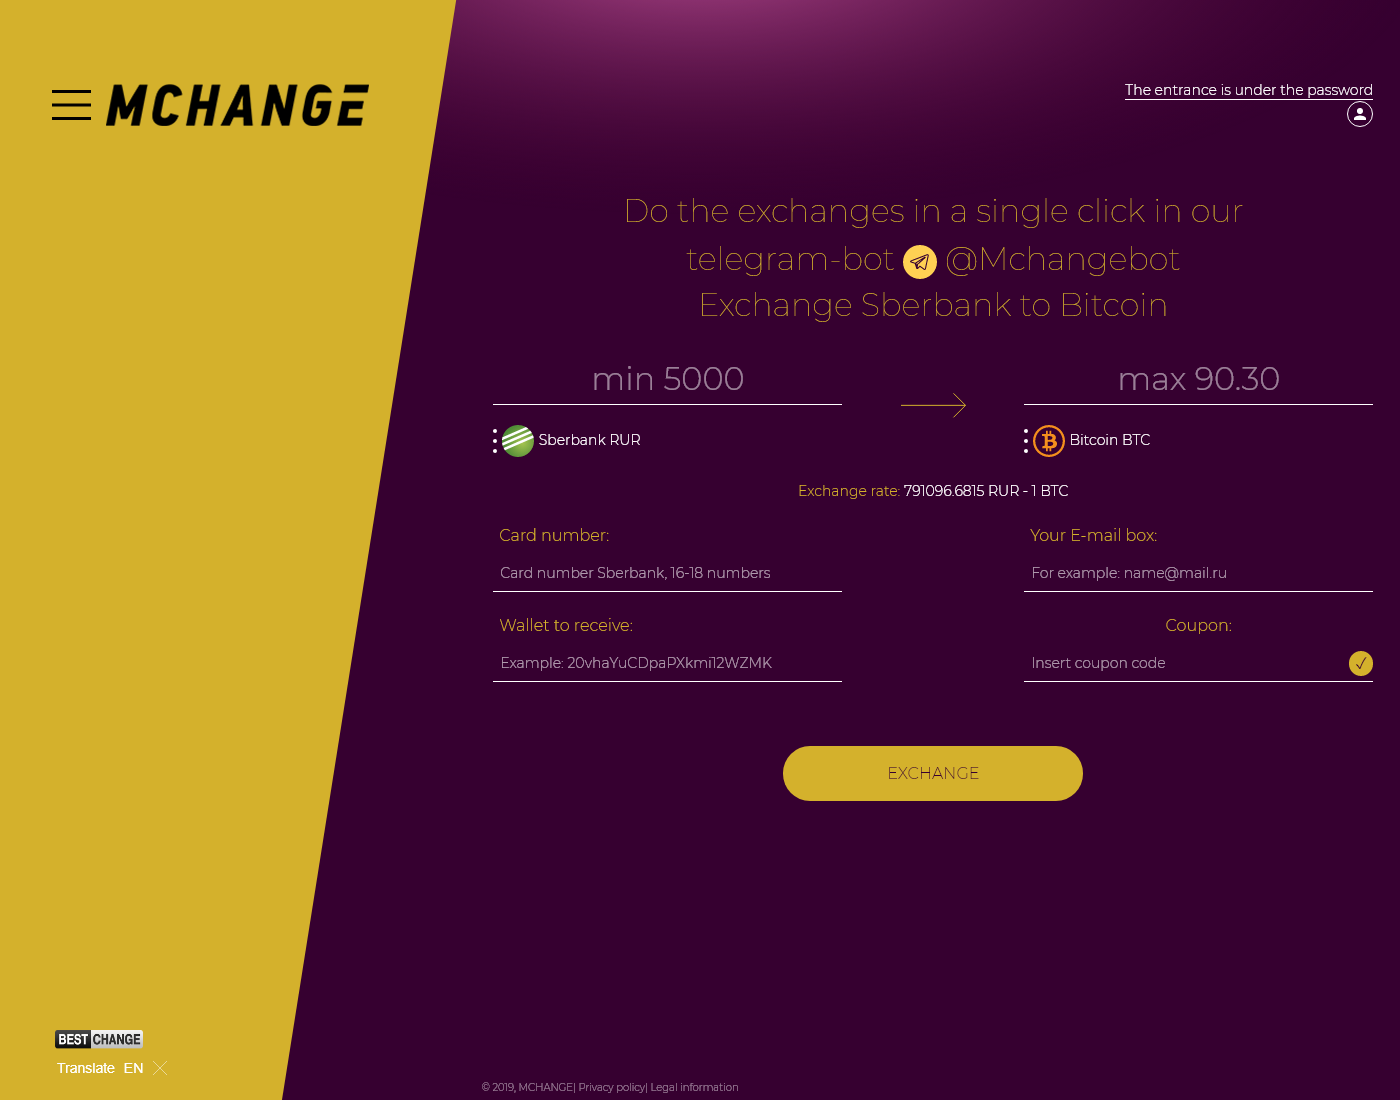 mchange user interface: the home page in English